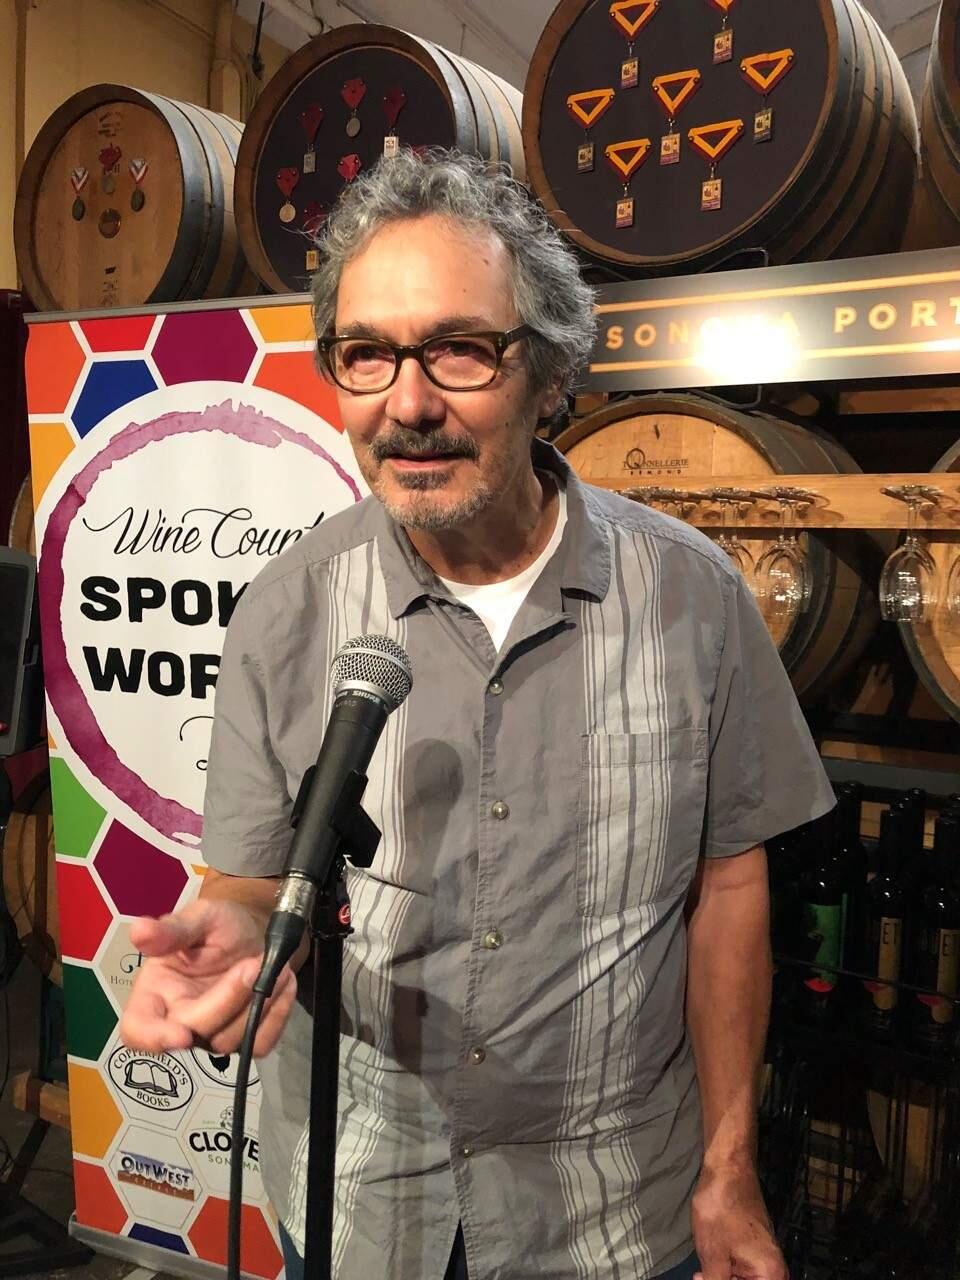 Rick Roberts, winner of August's West Side Stories 'story slam' event at Sonoma Portworks.